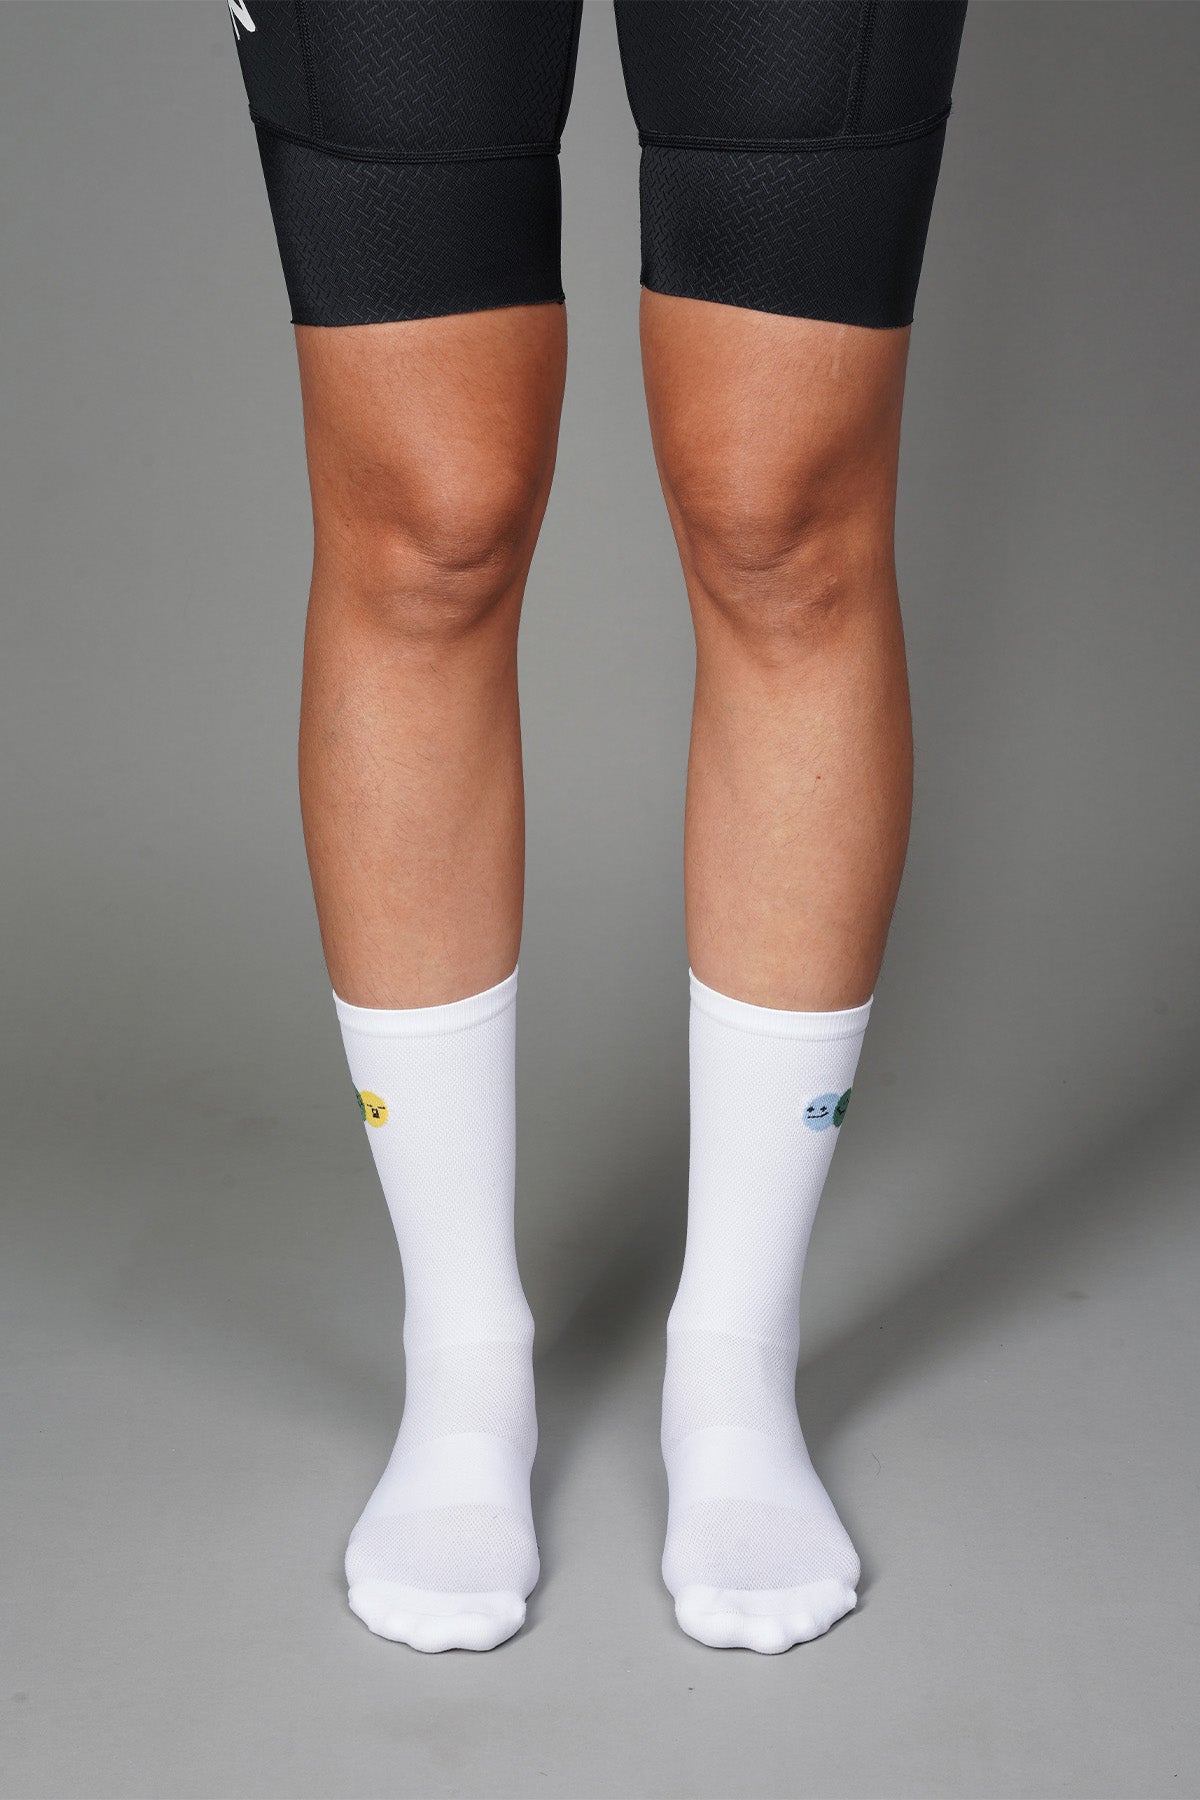 SMIRK FACES - WHITE FRONT | BEST CYCLING SOCKS